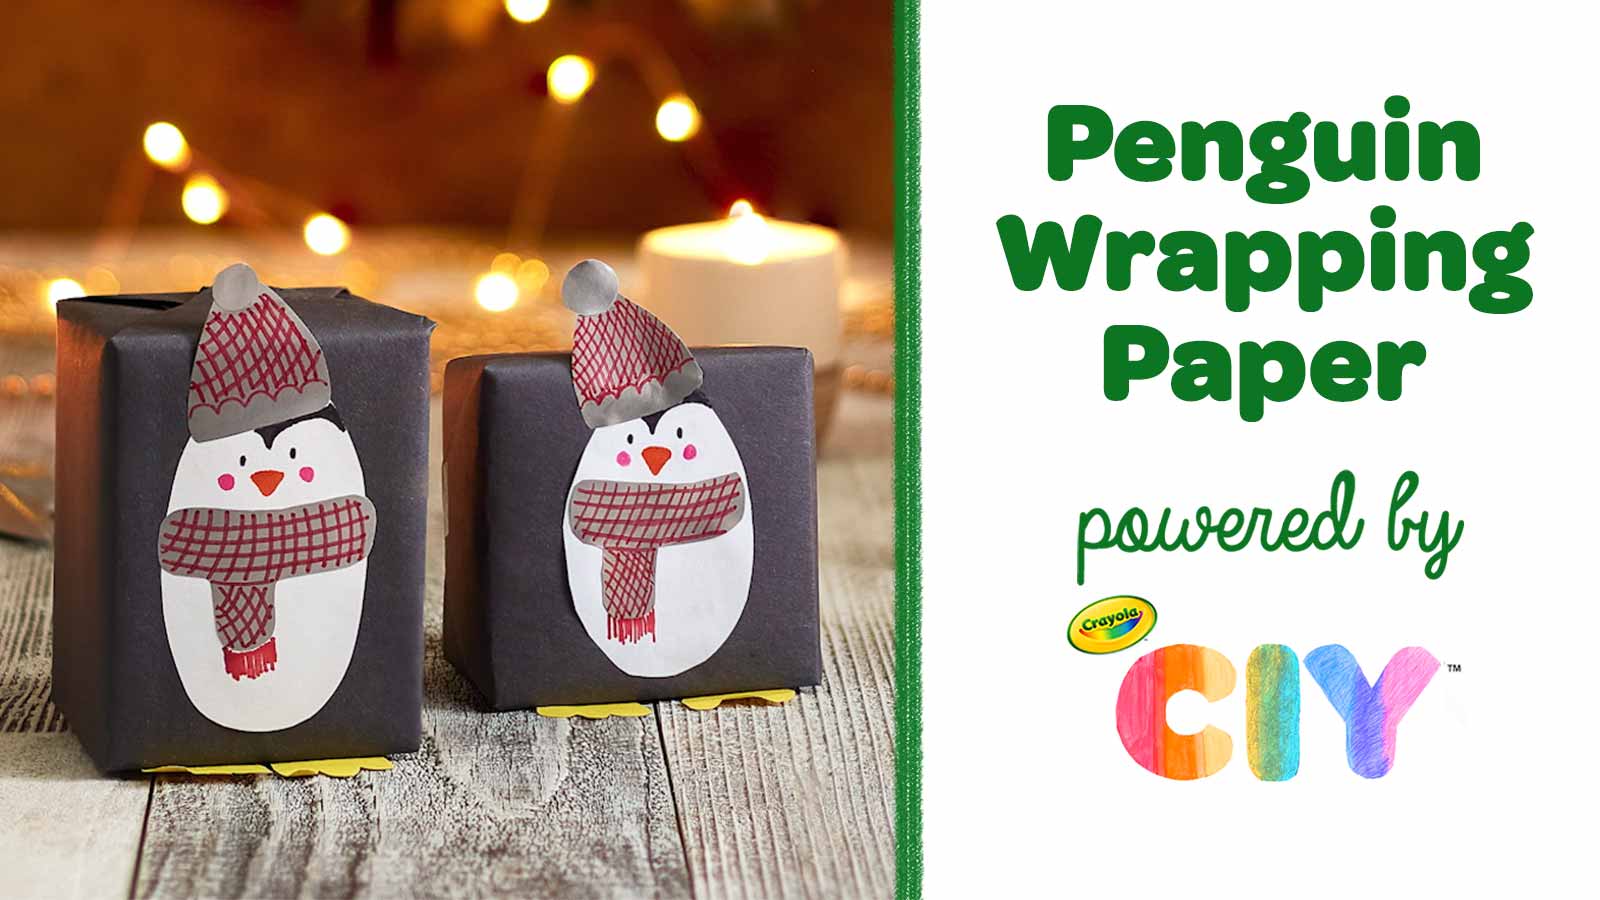 Penguin Wrapping Paper, DIY Gift Wrap, Crafts